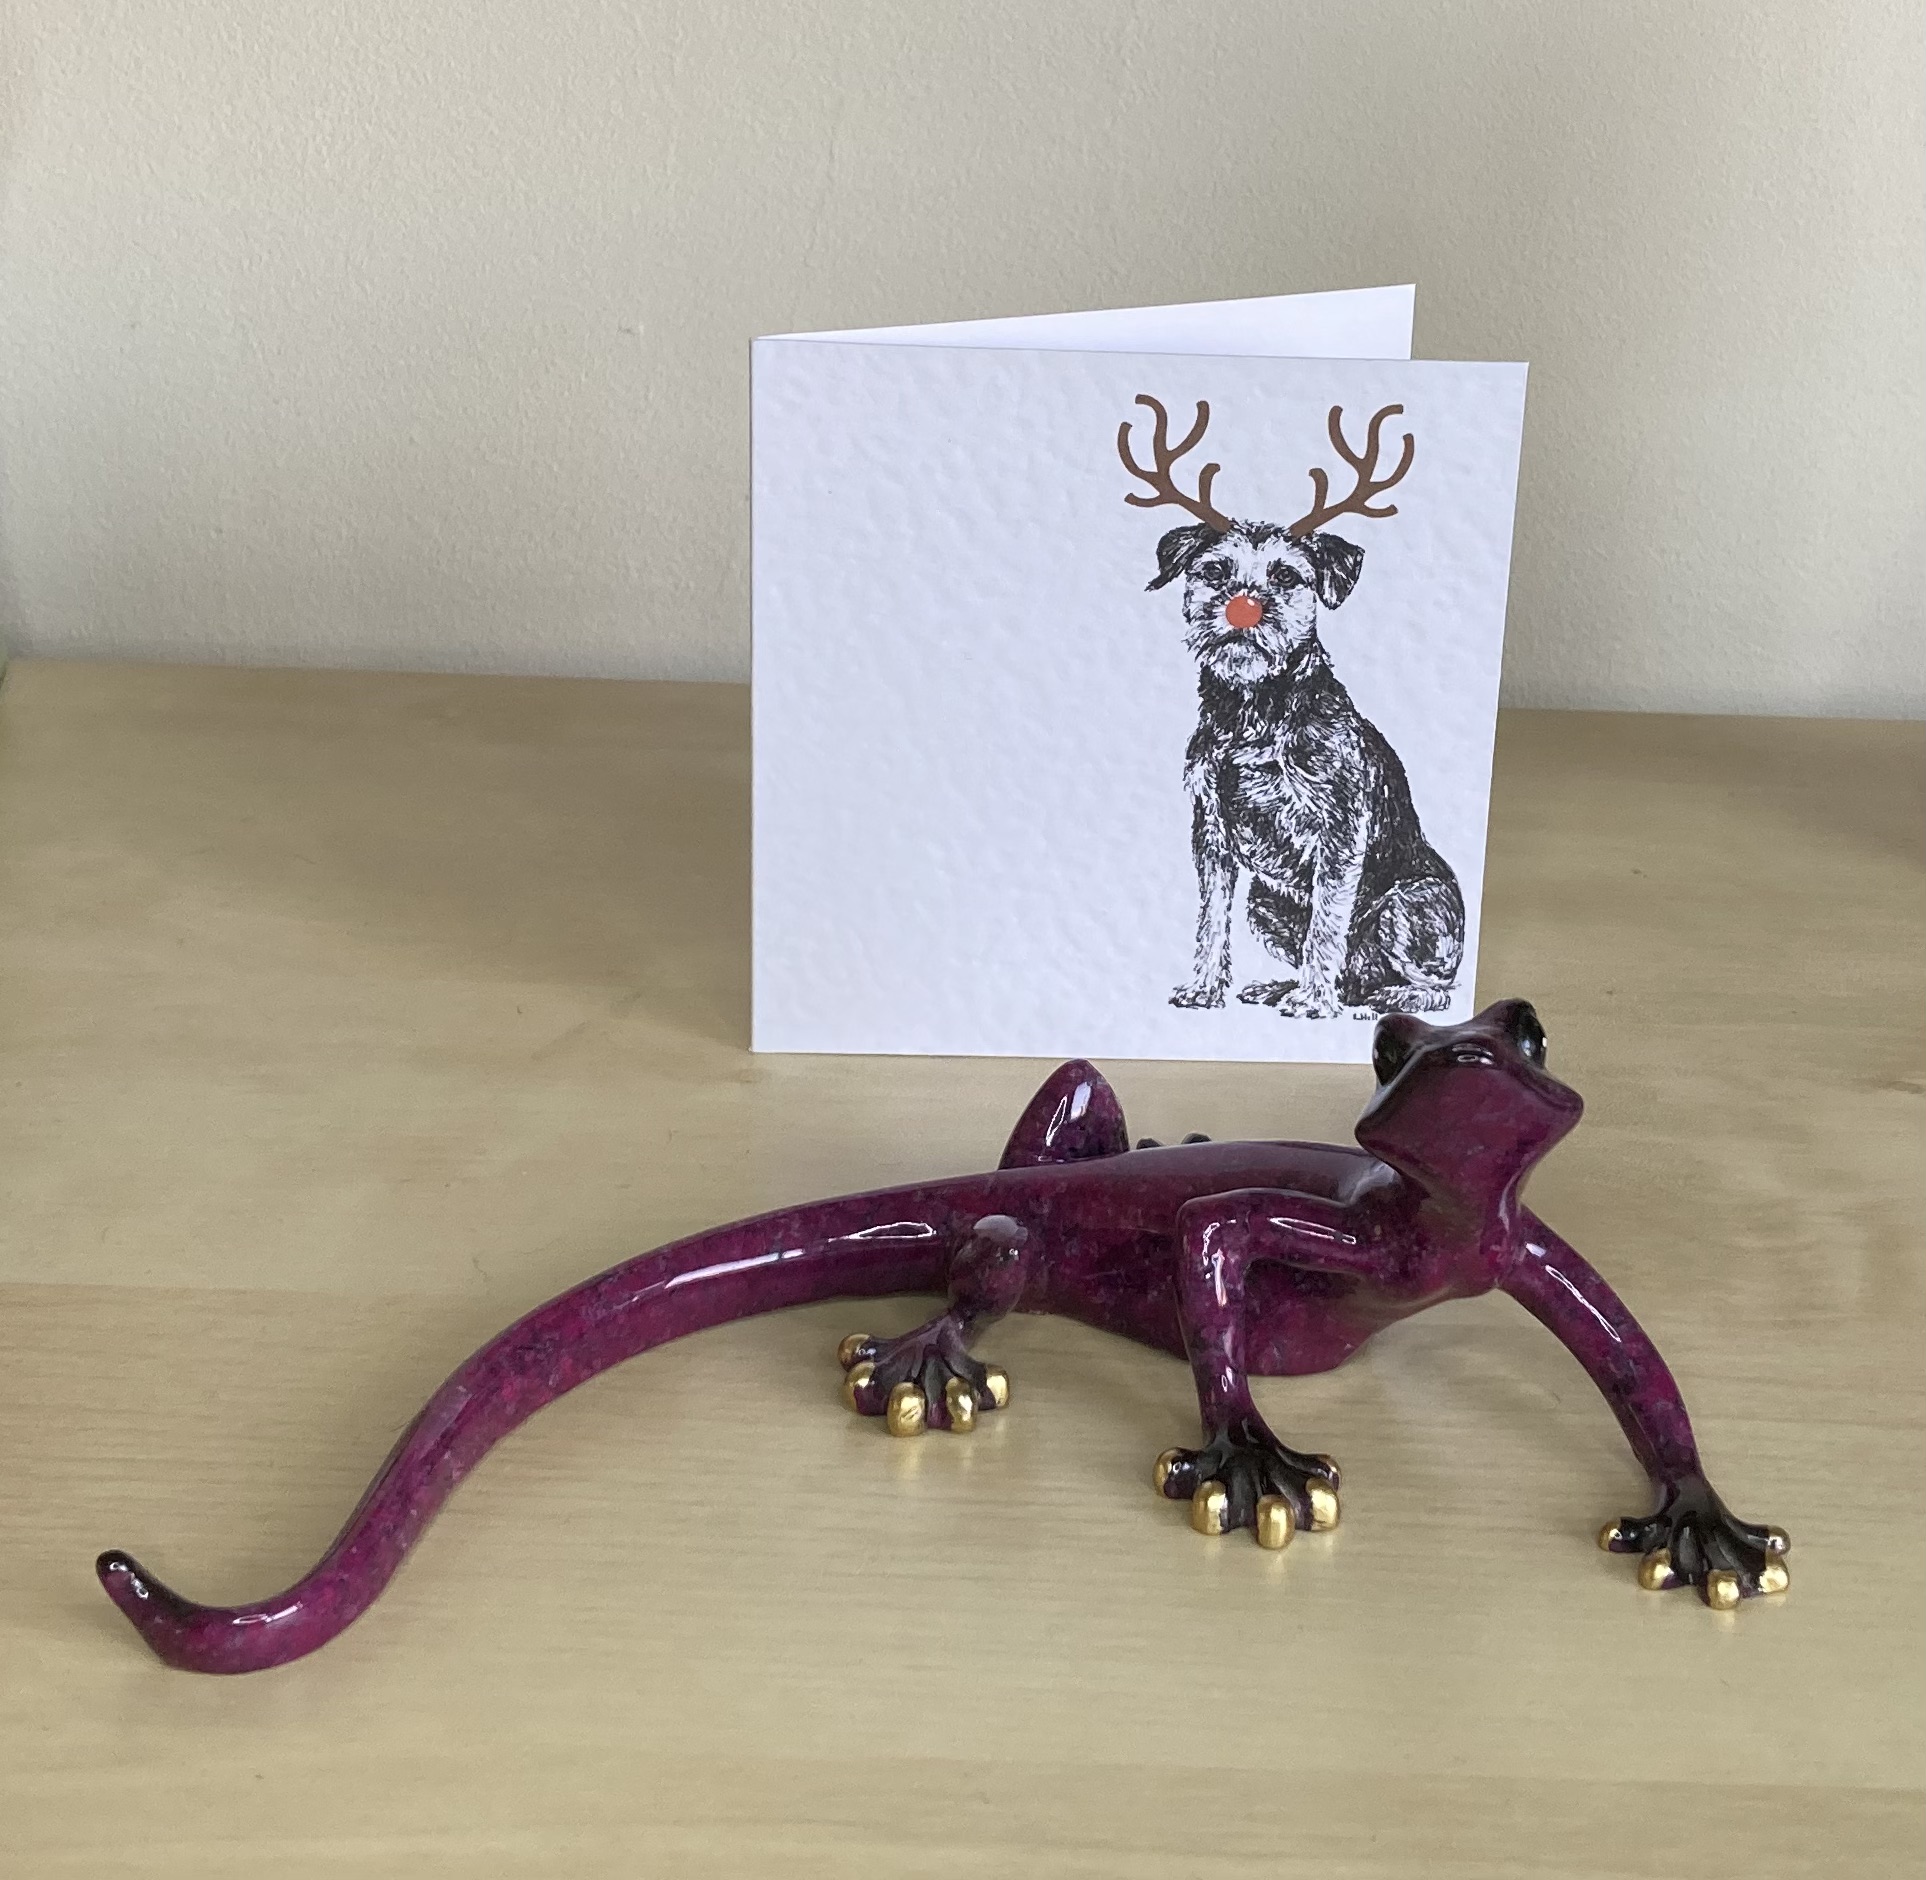 Border Terrier with Reindeer antlers and red nose Christmas card by Louisa Hill